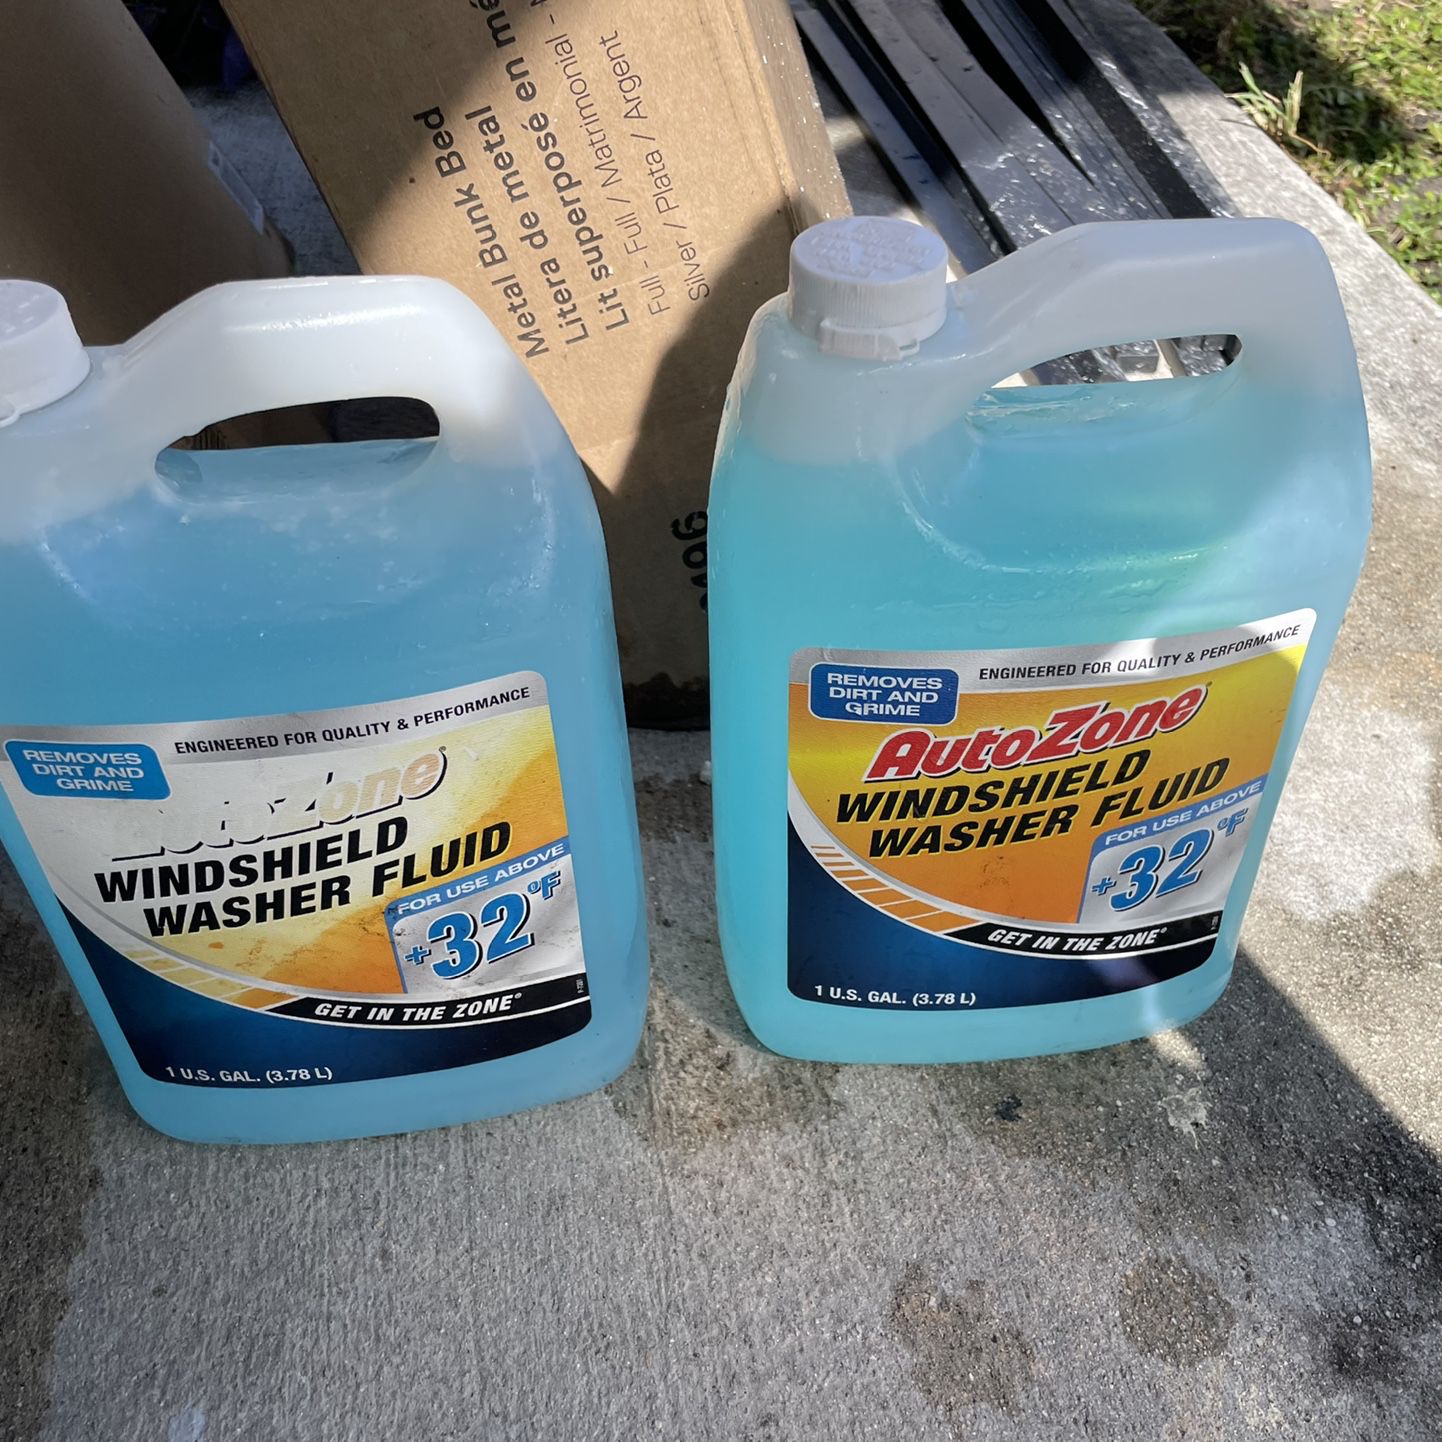 Windshield Washer Fluid Two Gallons for Sale in Hollywood, FL - OfferUp